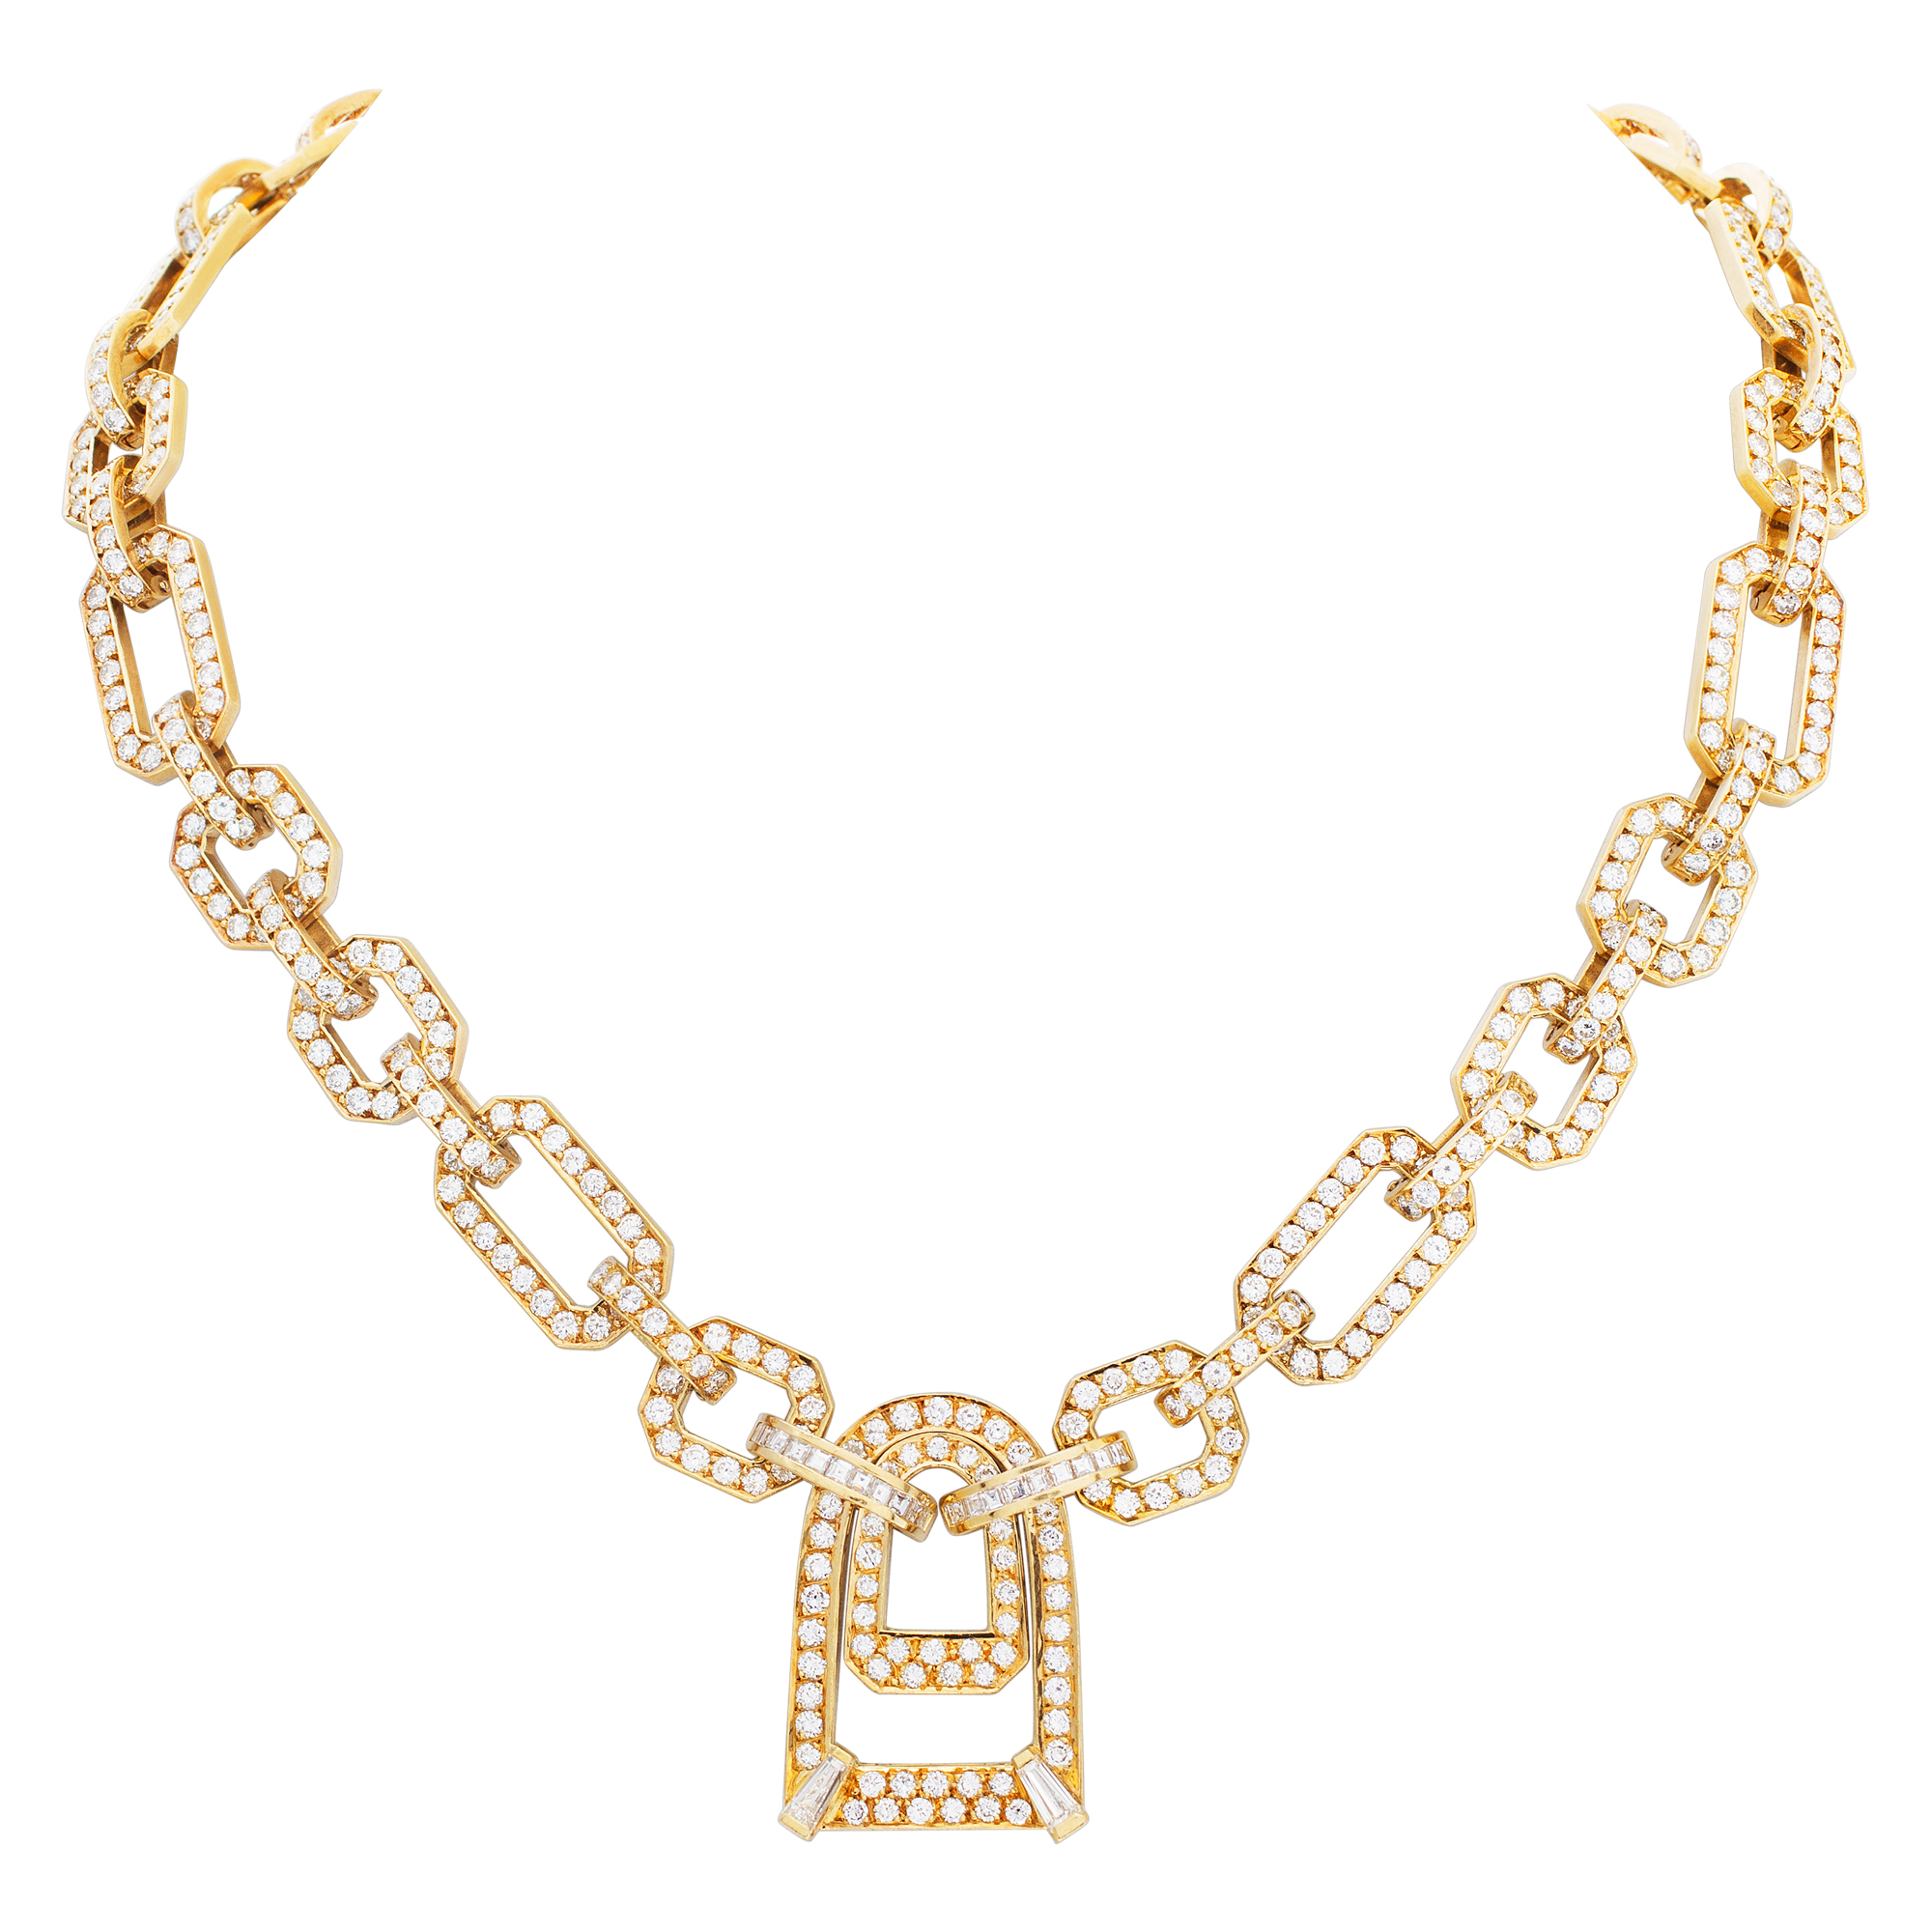 Geometric sparkling necklace with approx. 14 carats, full cut round brilliant and baguette diamond set in 18K yelllow gold